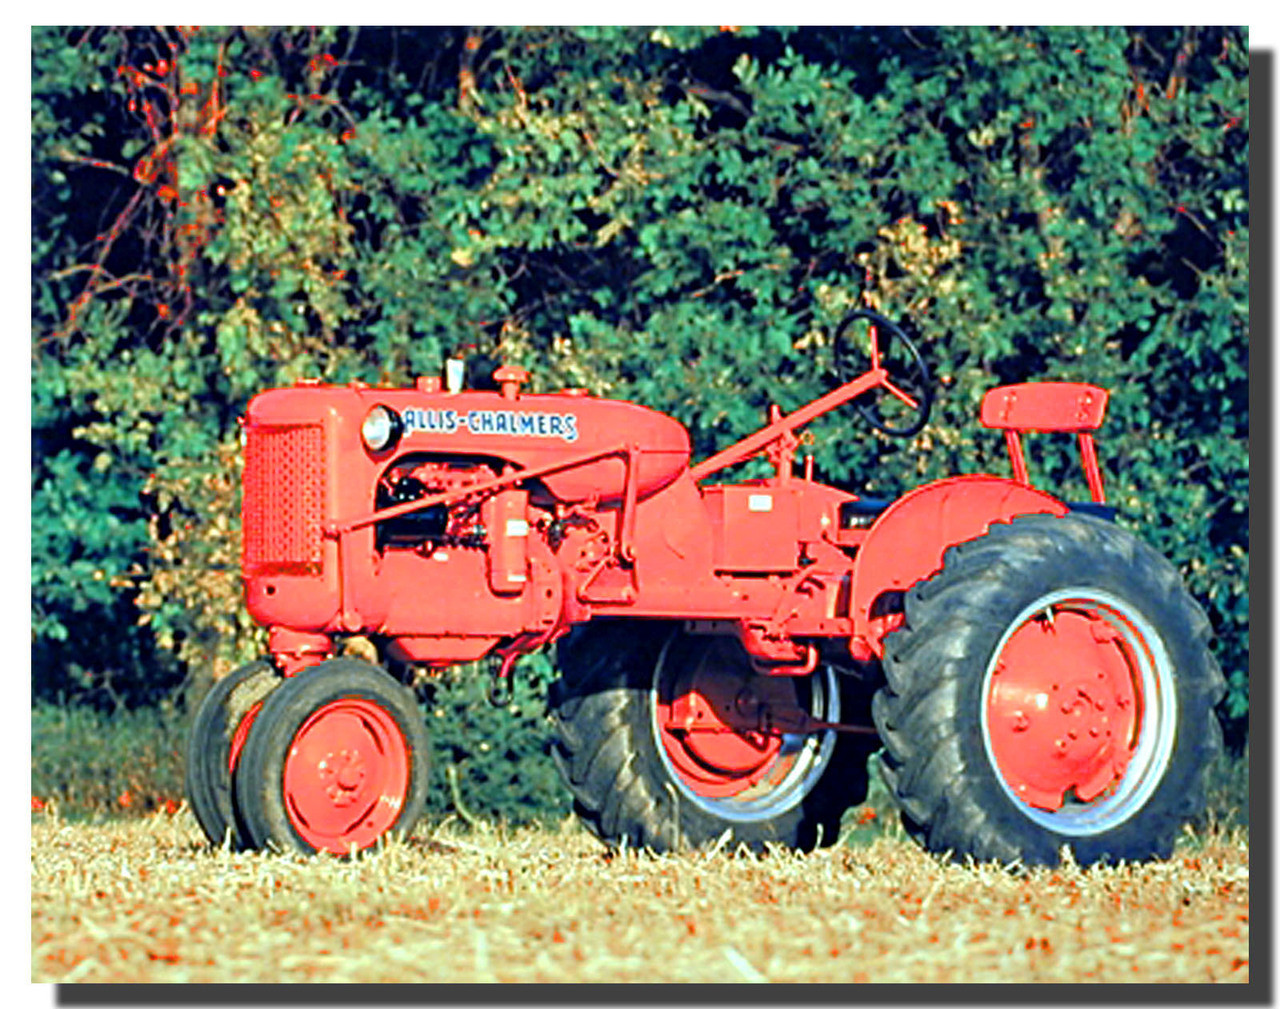 1948 Allis Chalmers C Tractor Poster Tractor Posters